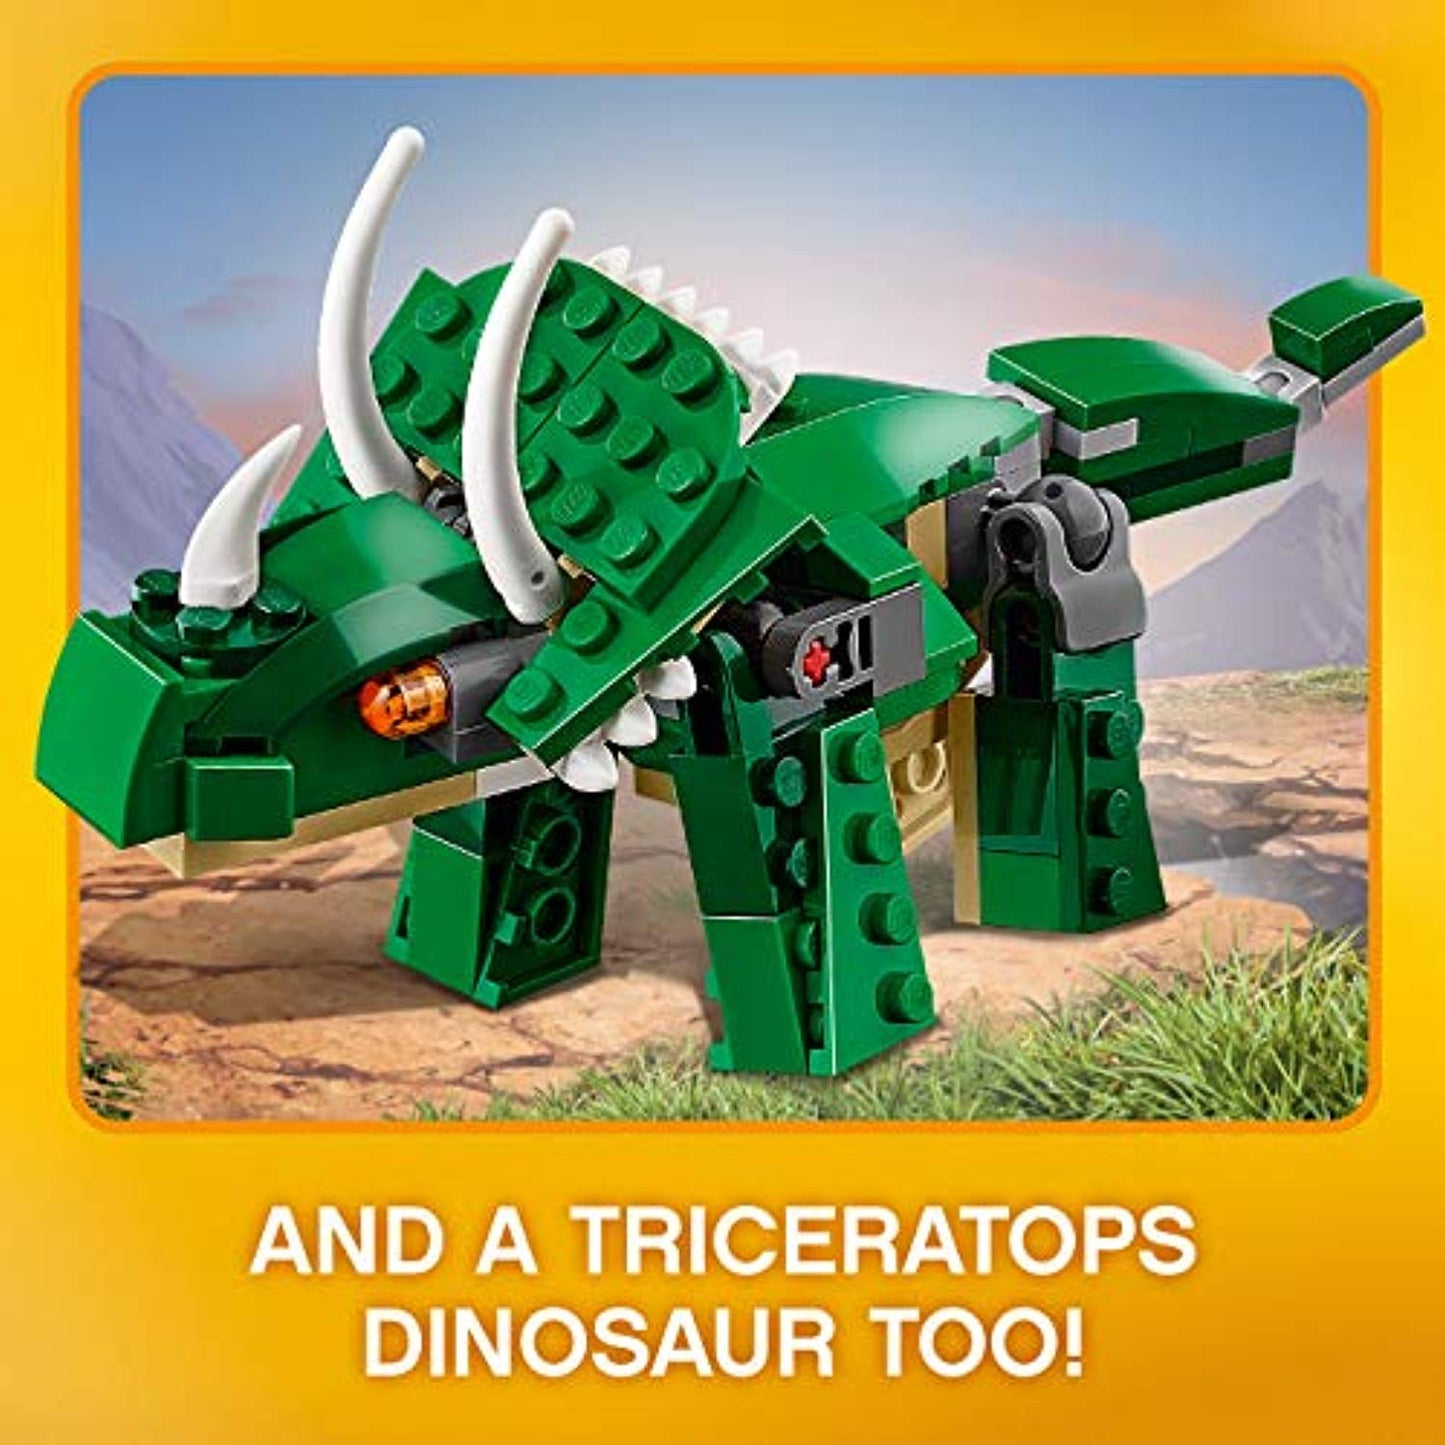 LEGO 31058 Creator Mighty Dinosaurs Toy, 3 in 1 Model, Triceratops and Pterodactyl Dinosaur Figures, Modular Building System - Offer Games